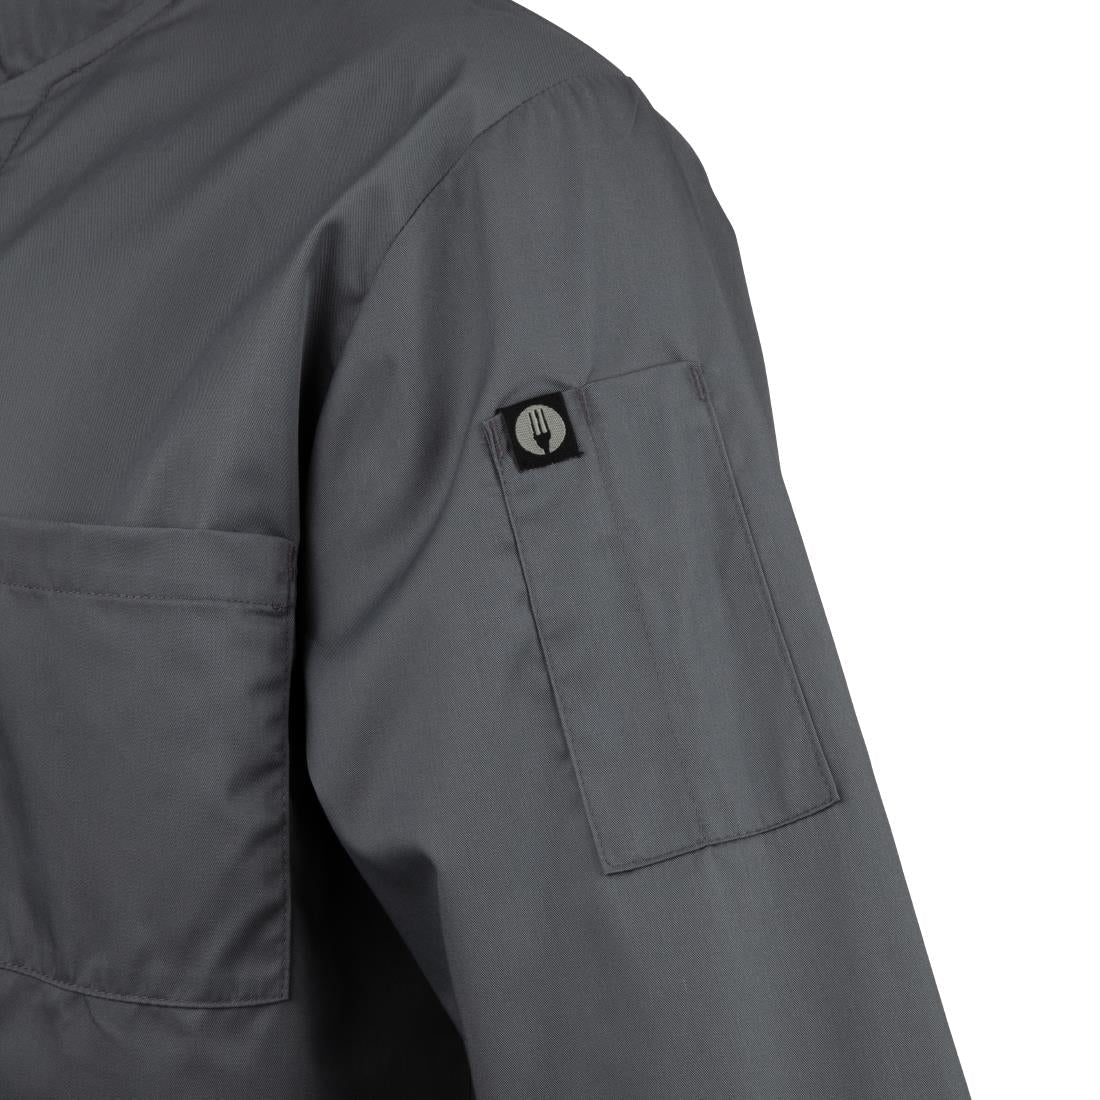 A934-3XL Colour By Chef Works Unisex Chef Jacket Grey 3XL JD Catering Equipment Solutions Ltd